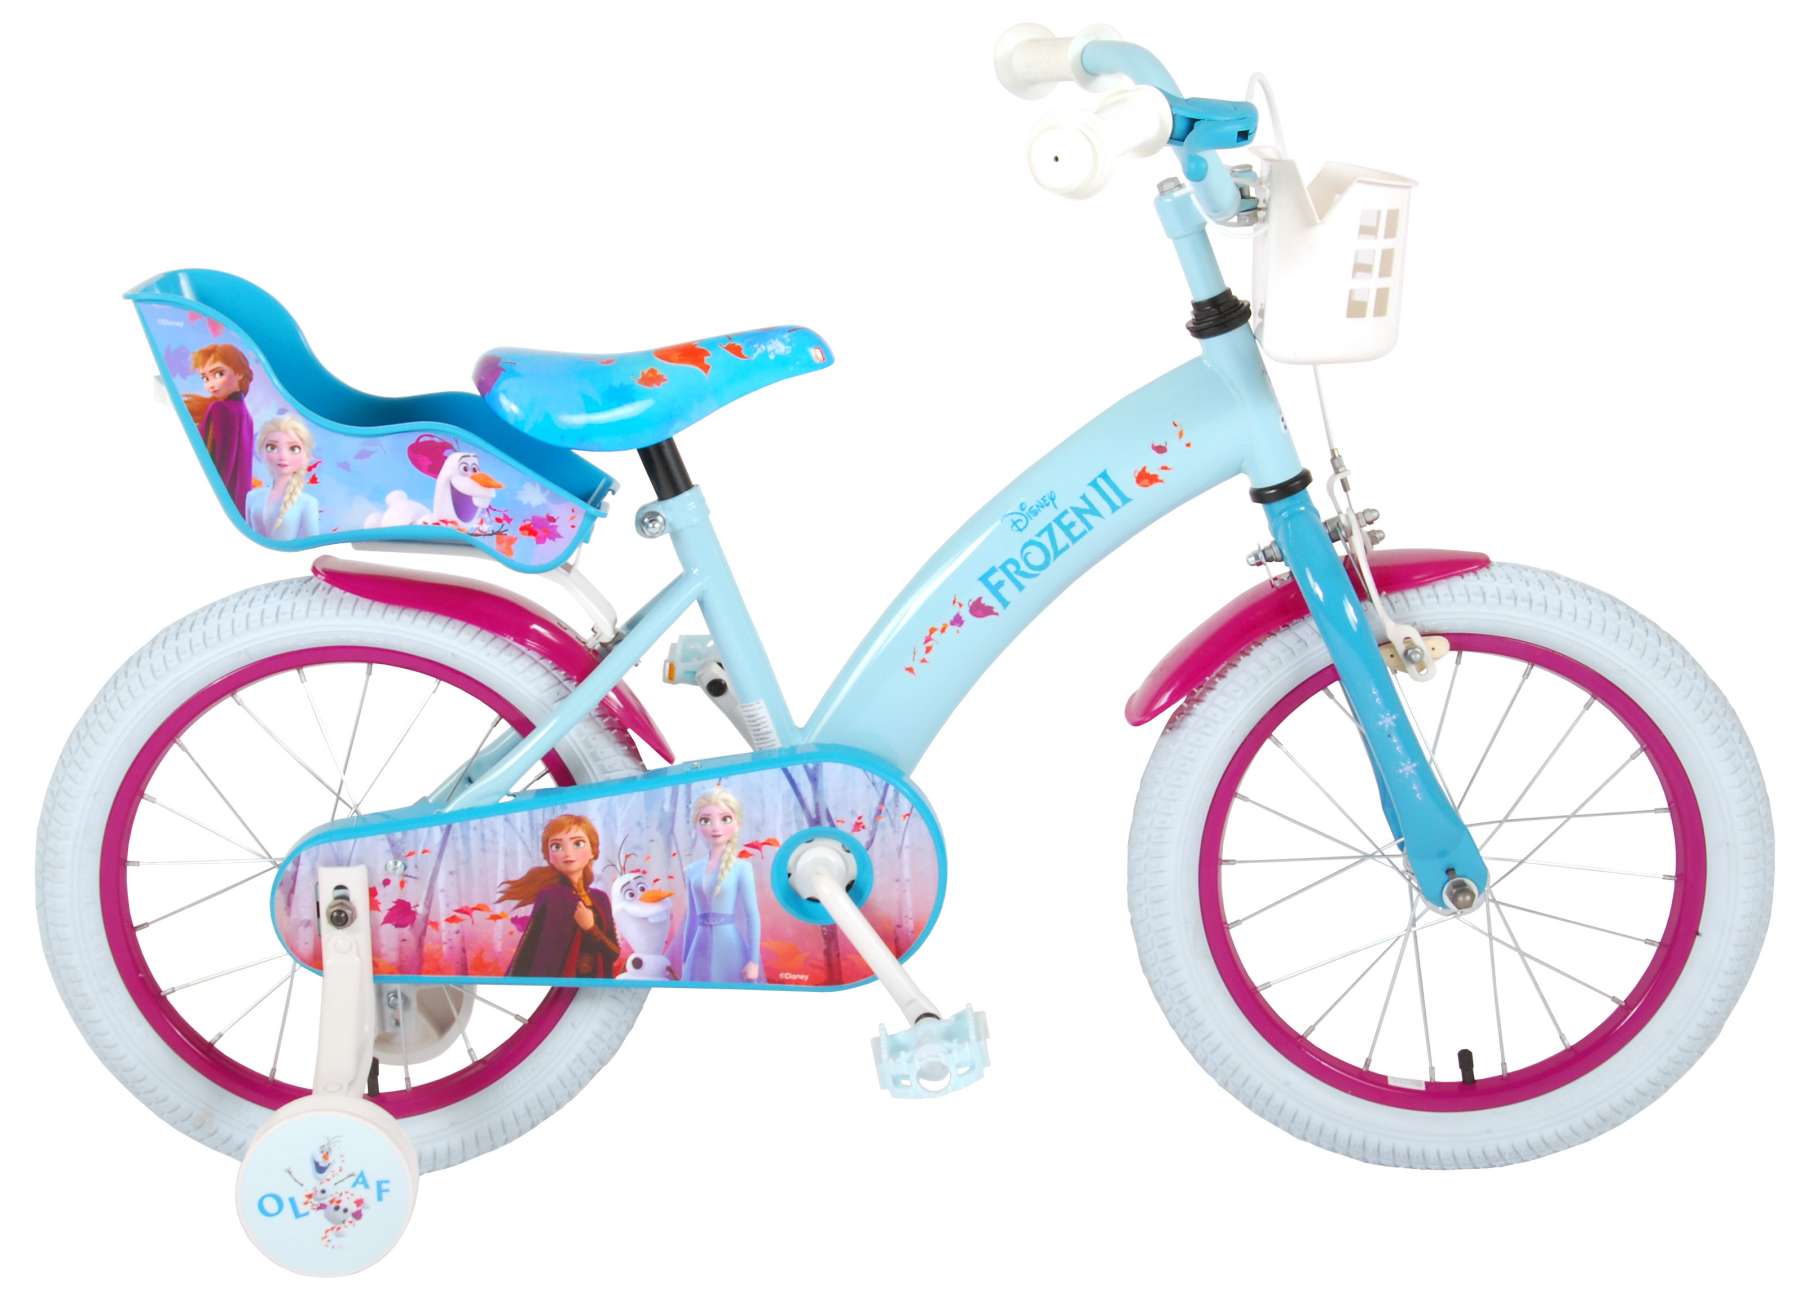 Kids Bike 16 Inch Children Boys Gifts Blue Bicycle Cycling,Removable Stabilisers 